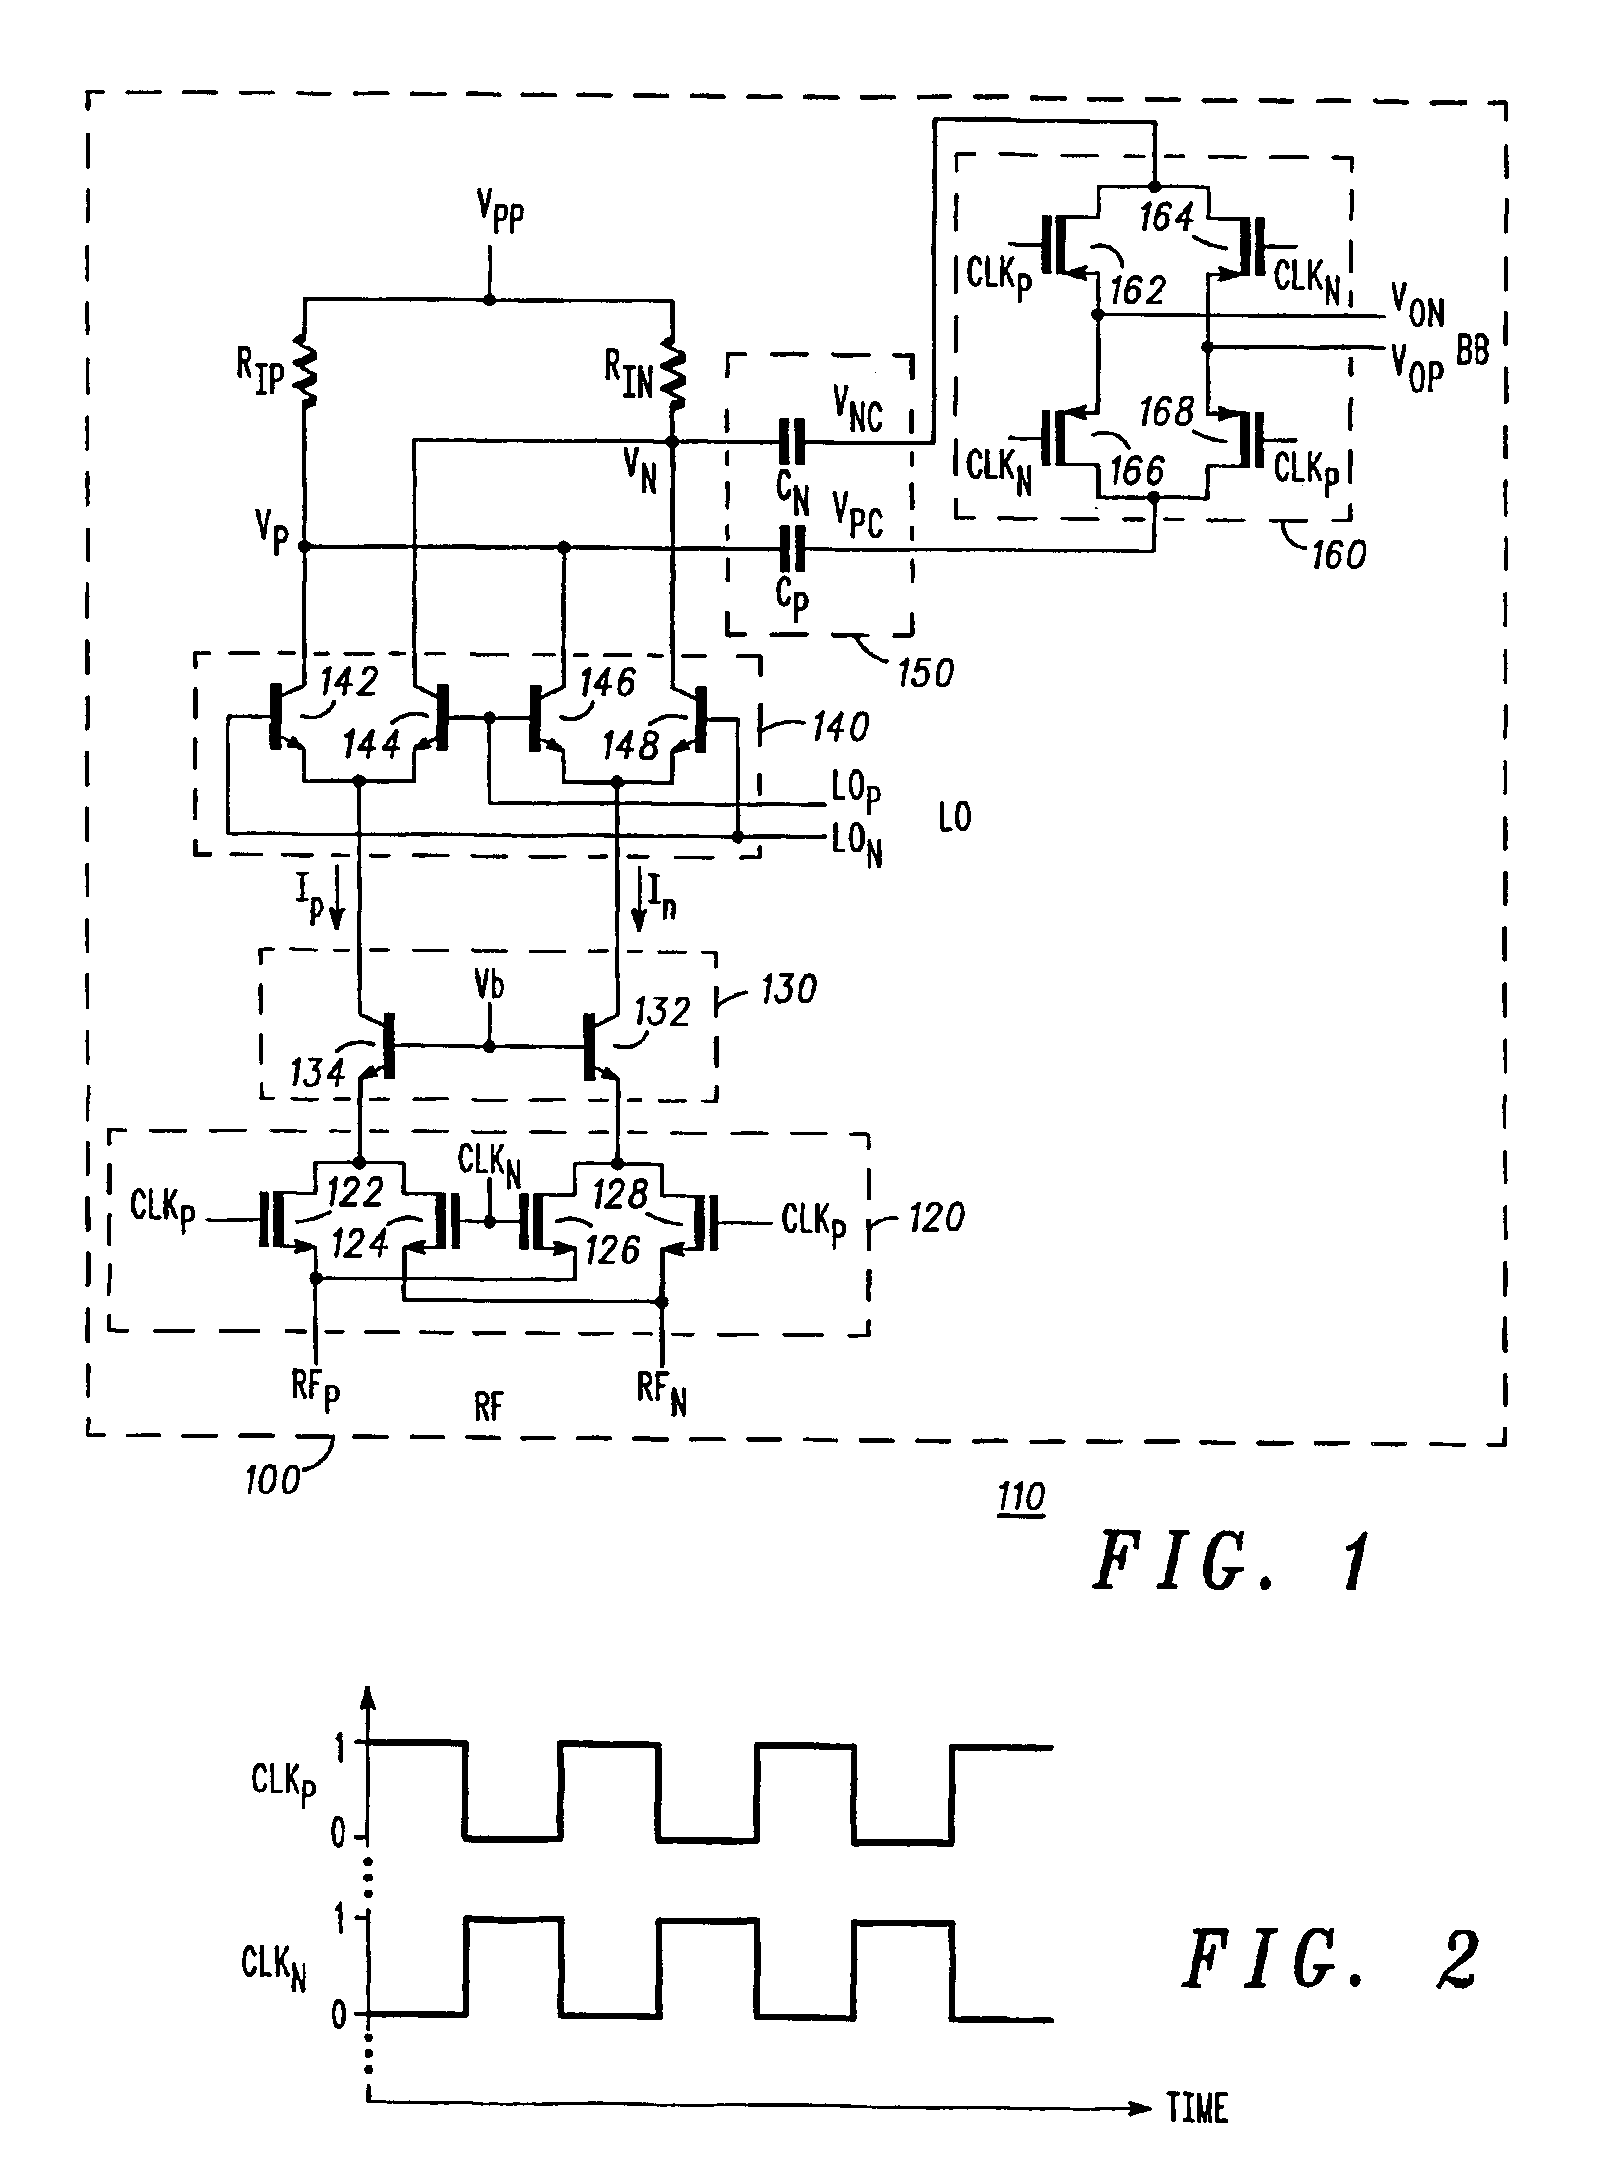 Apparatus and method for improved chopping mixer